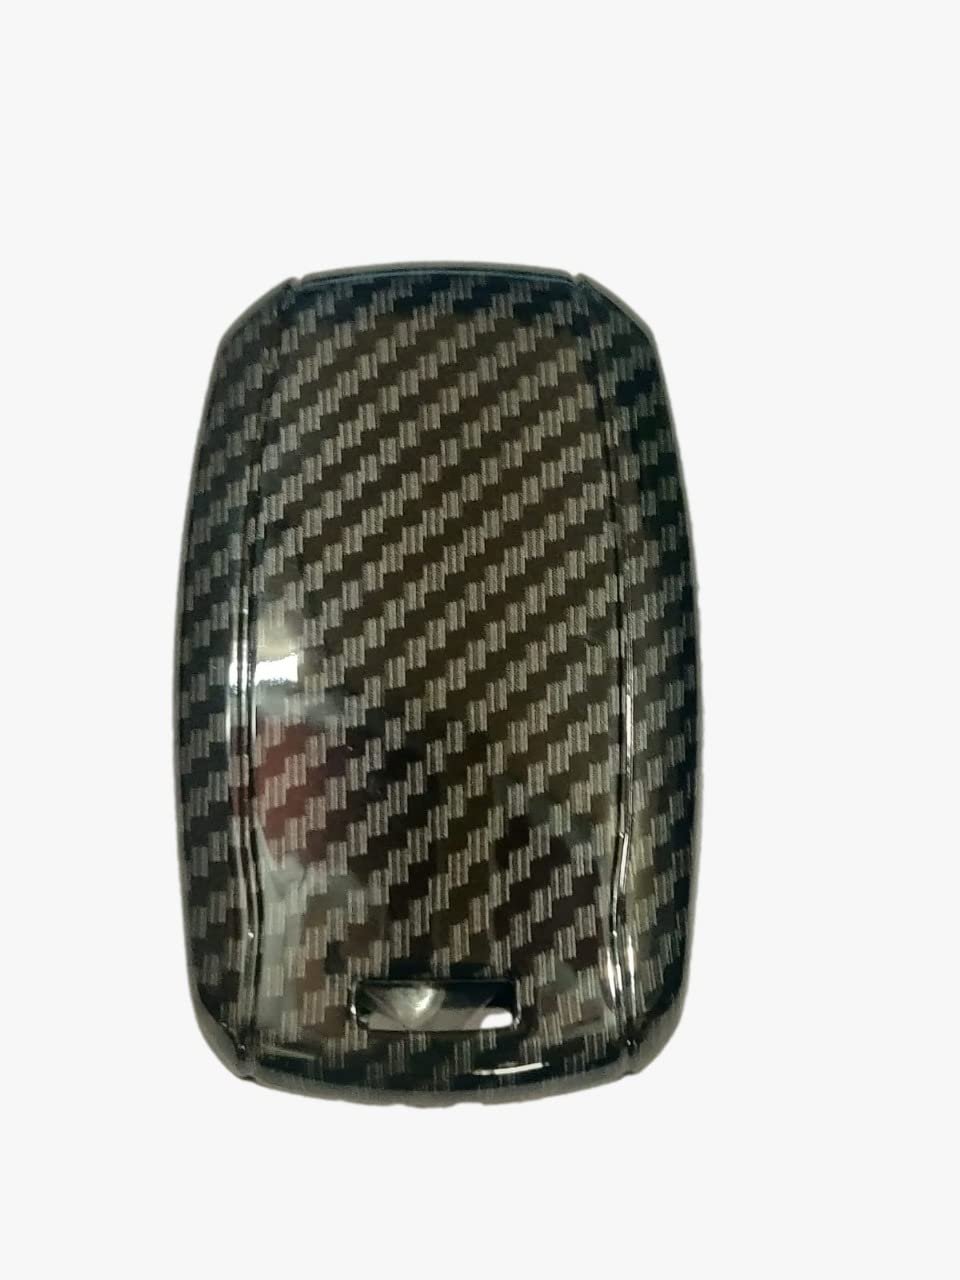 Carbon Fiber Key Cover Compatible with Kia Carnival Smart Key (Push Button Start Models only) Image 